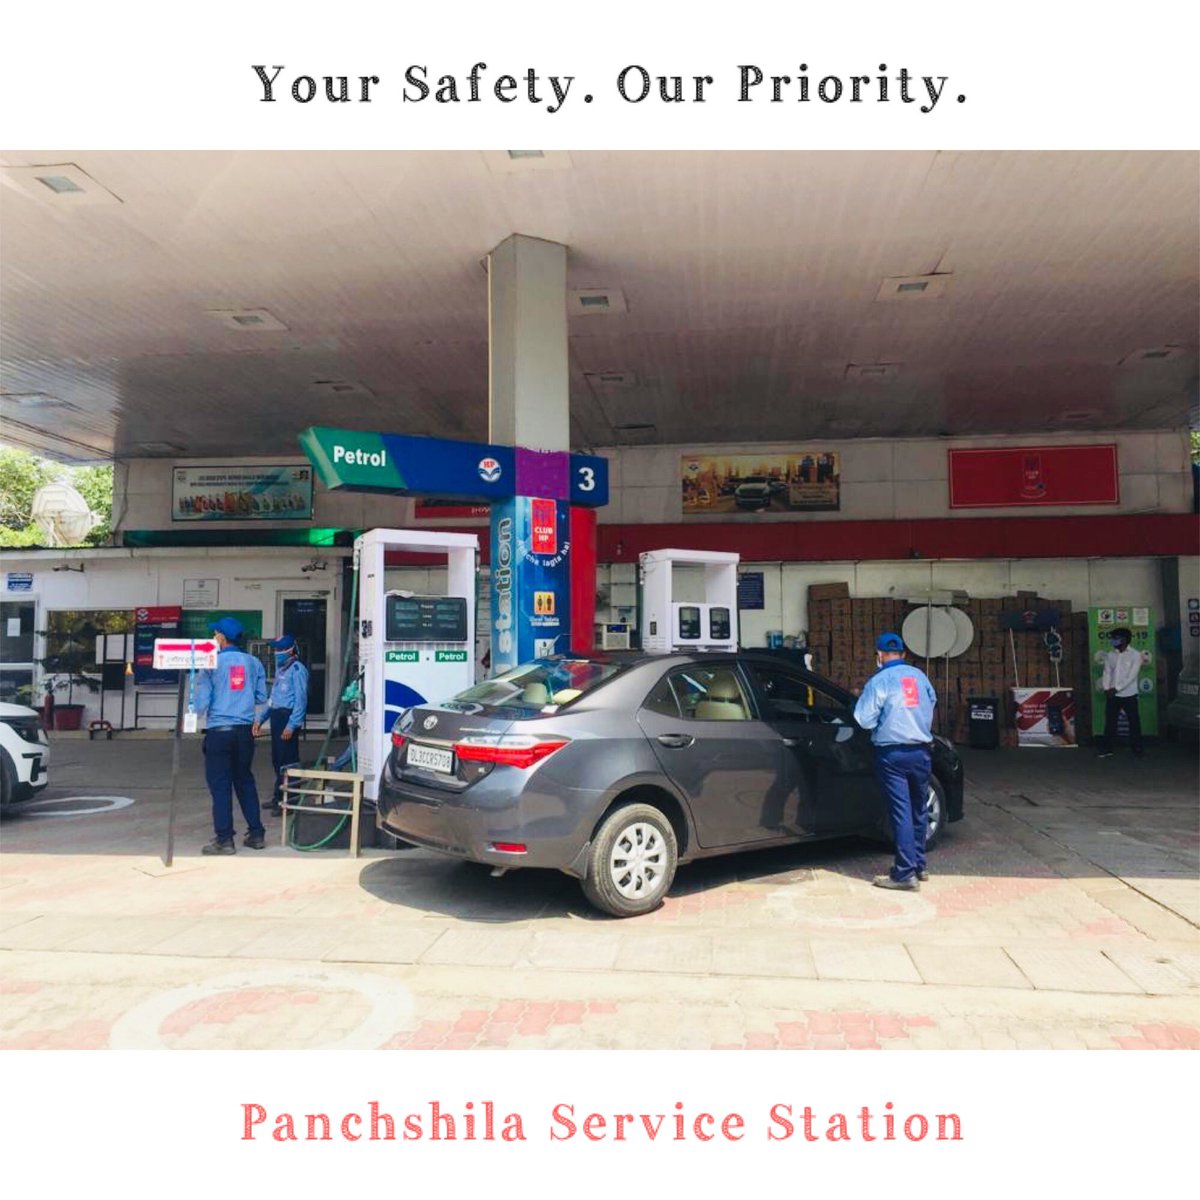 Complying with high standards of Health & Safety measures, #PanchshilaServiceStation makes it a priority to serve you with precautions at all times. We welcome you for a stressfree fuelling experience! #yoursafetyourpriority
@jindalhpc @HPCL @baghramesh1 @Rg03Goel @hpcl_retail